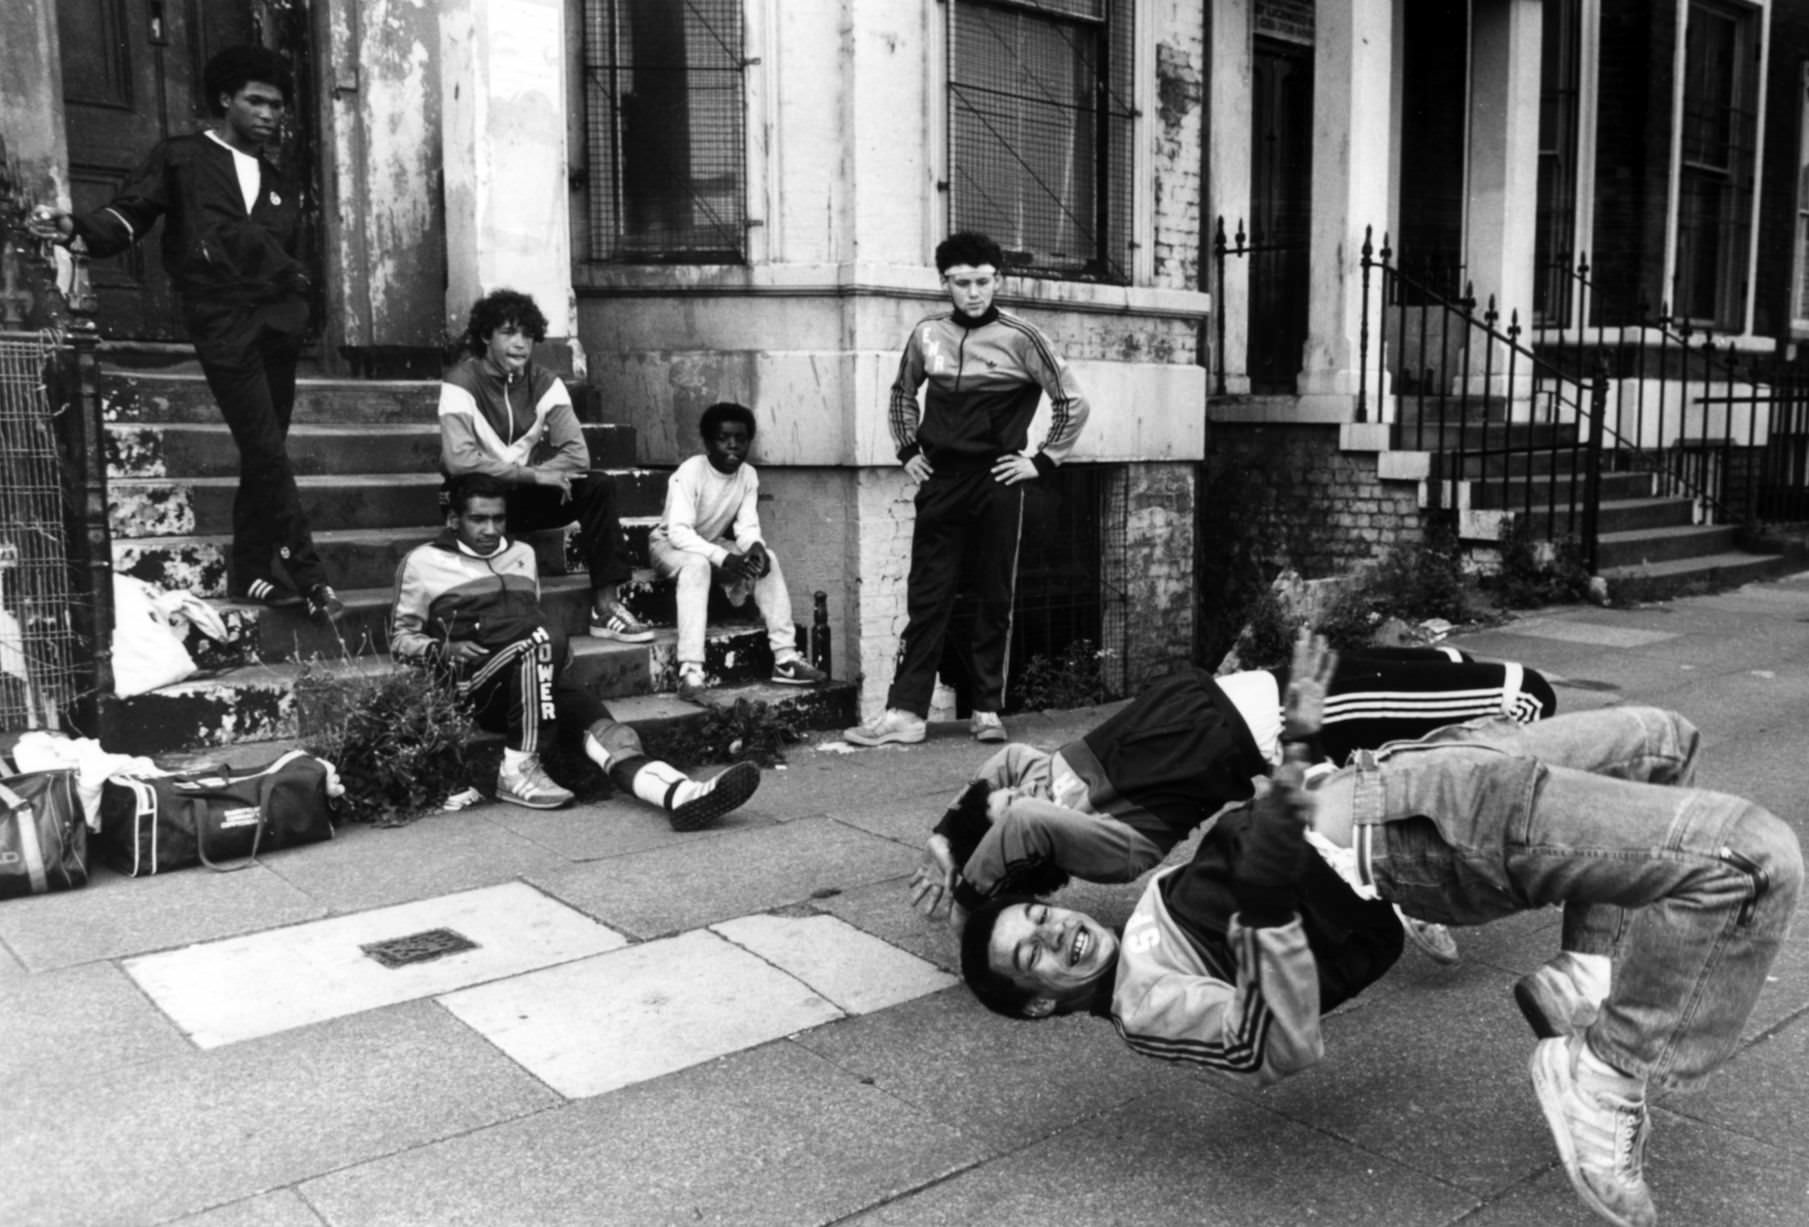 A group of breakdancers, the Eastwood Rockers, going through their break dancing paces on the streets of Liverpool.